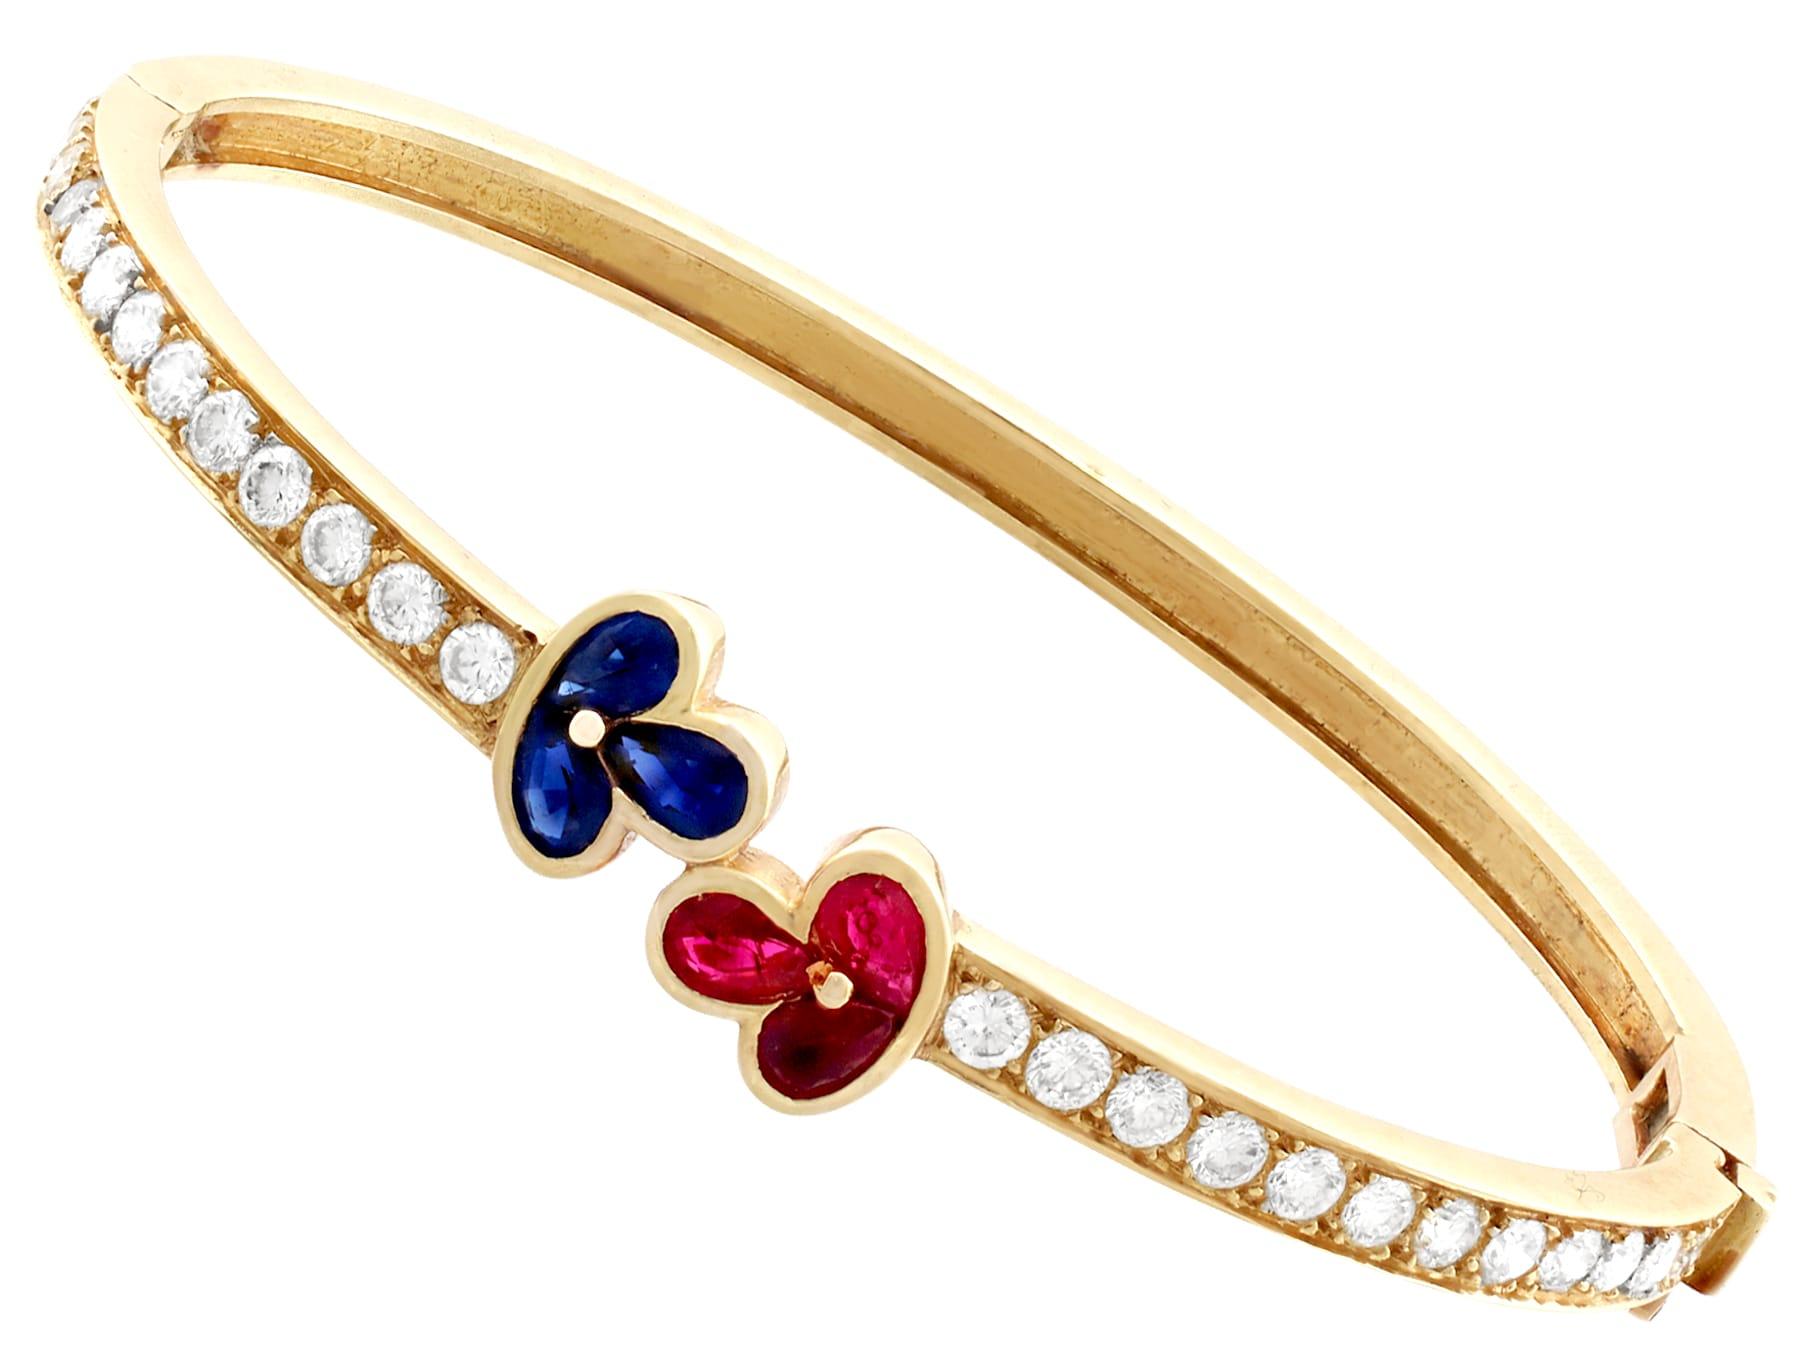 1980s Vintage French 1.05 Carat Ruby 2.16 Carat Diamond and Sapphire Gold Bangle In Excellent Condition For Sale In Jesmond, Newcastle Upon Tyne